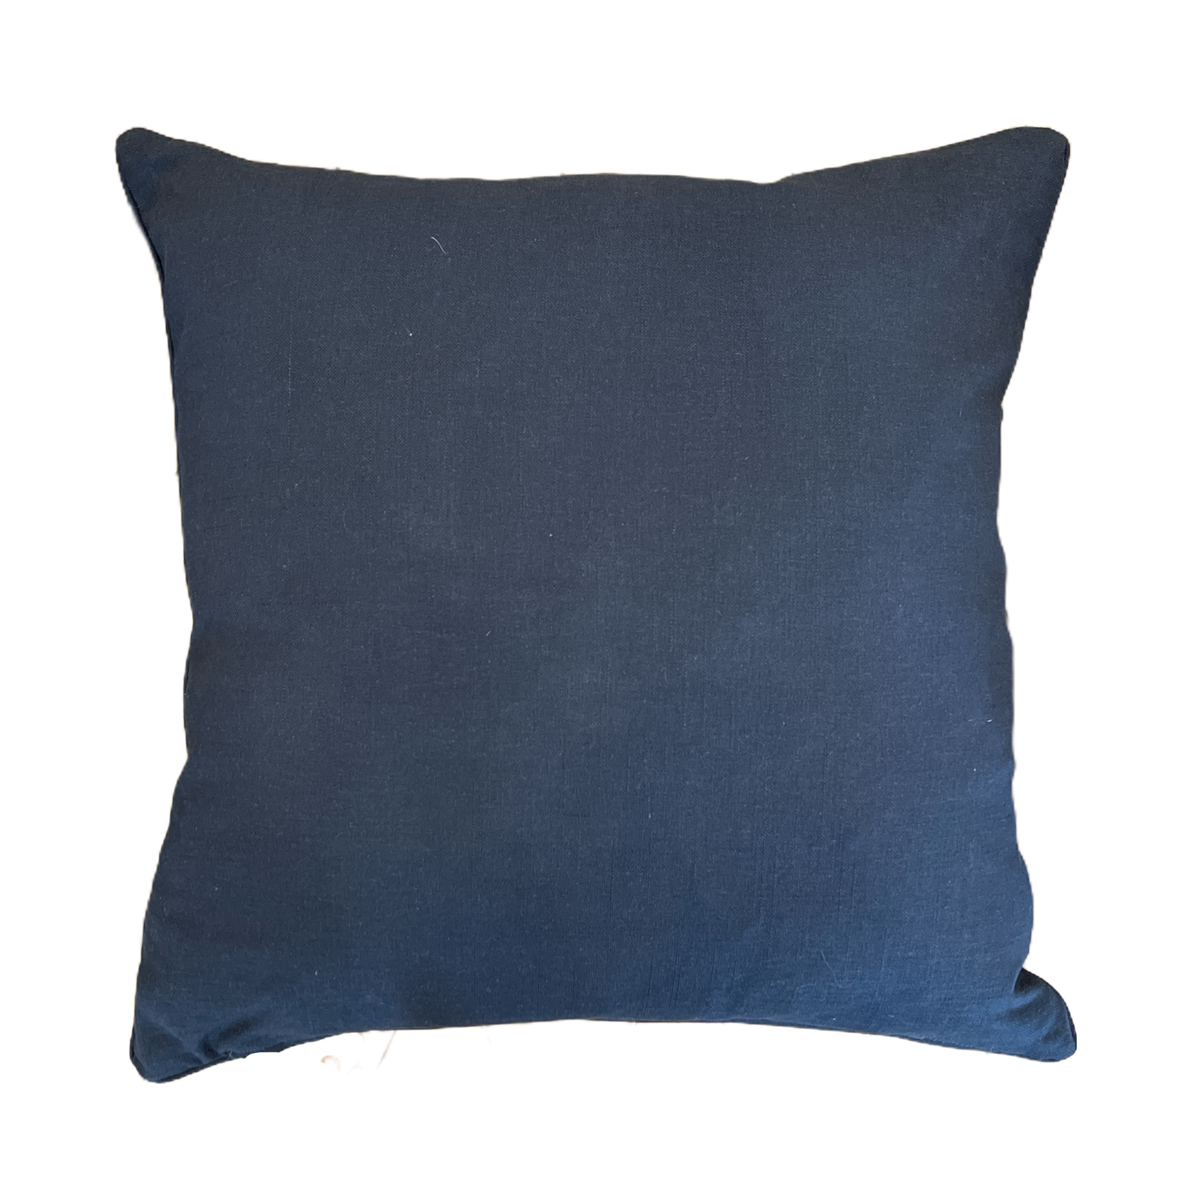 The Blues Pillow